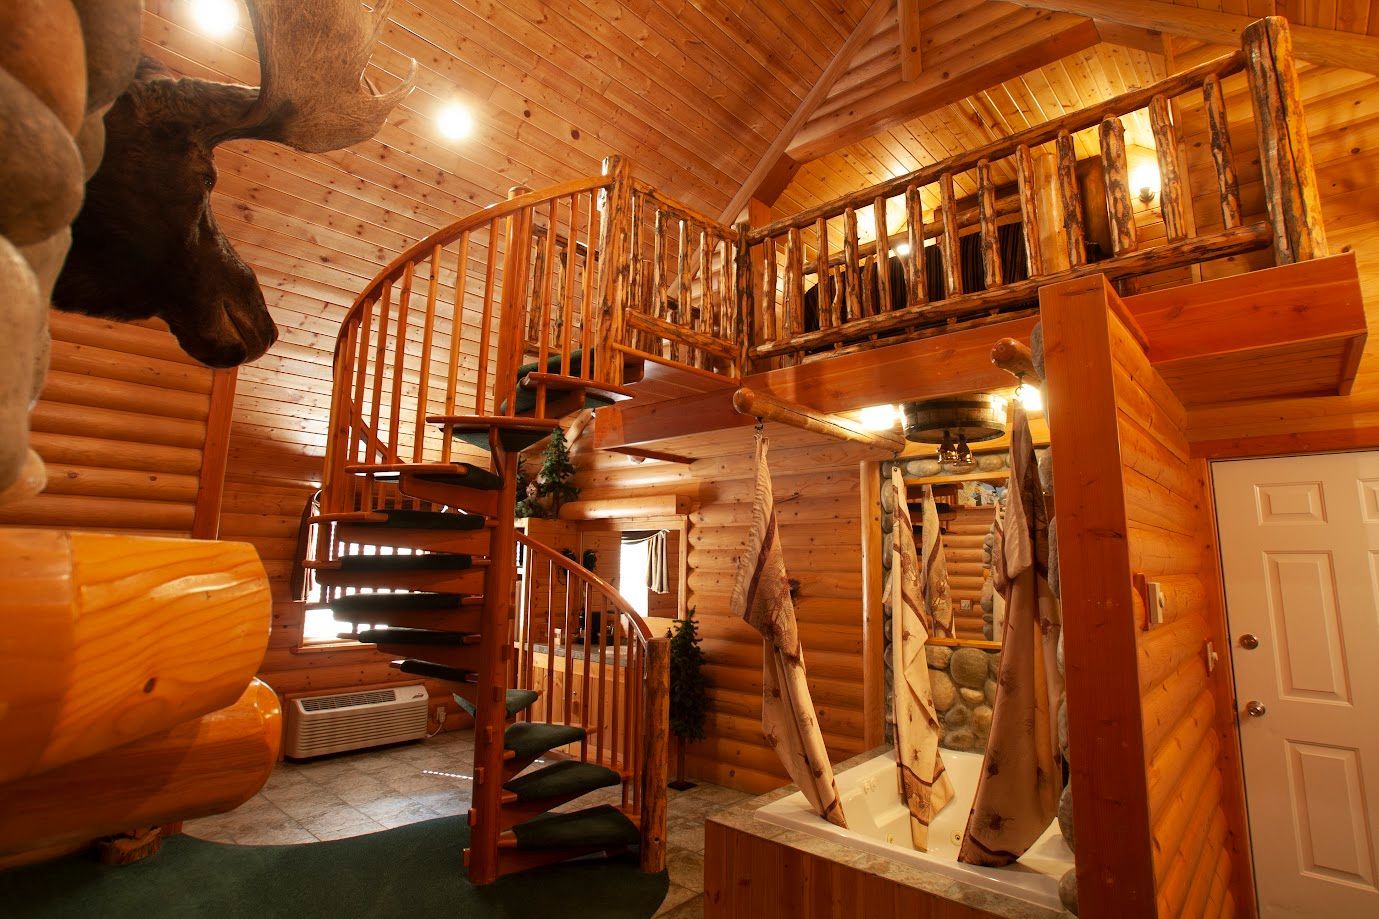 A wooden house with a spiral staircase leading to the second floor